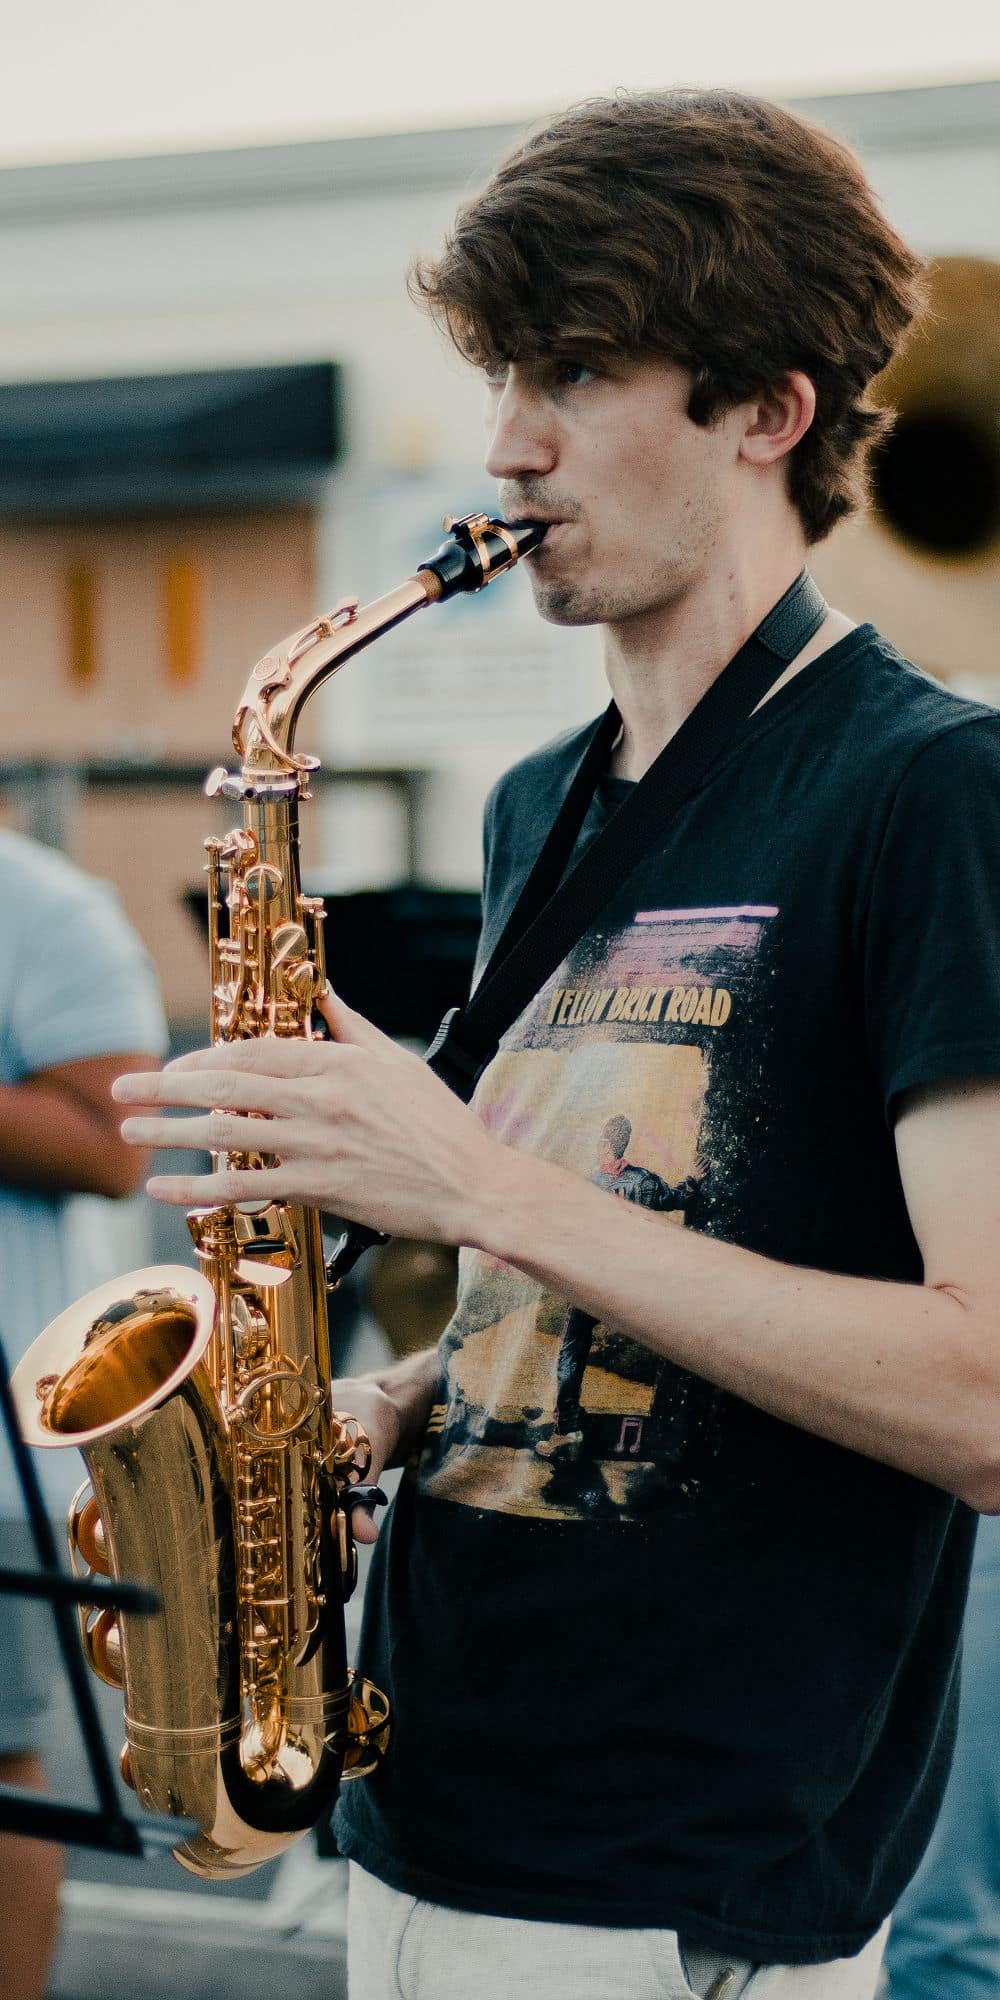 Graydon Russell playing his saxophone in Embry-Riddle’s Pep Band. (Photo: Graydon Russell)